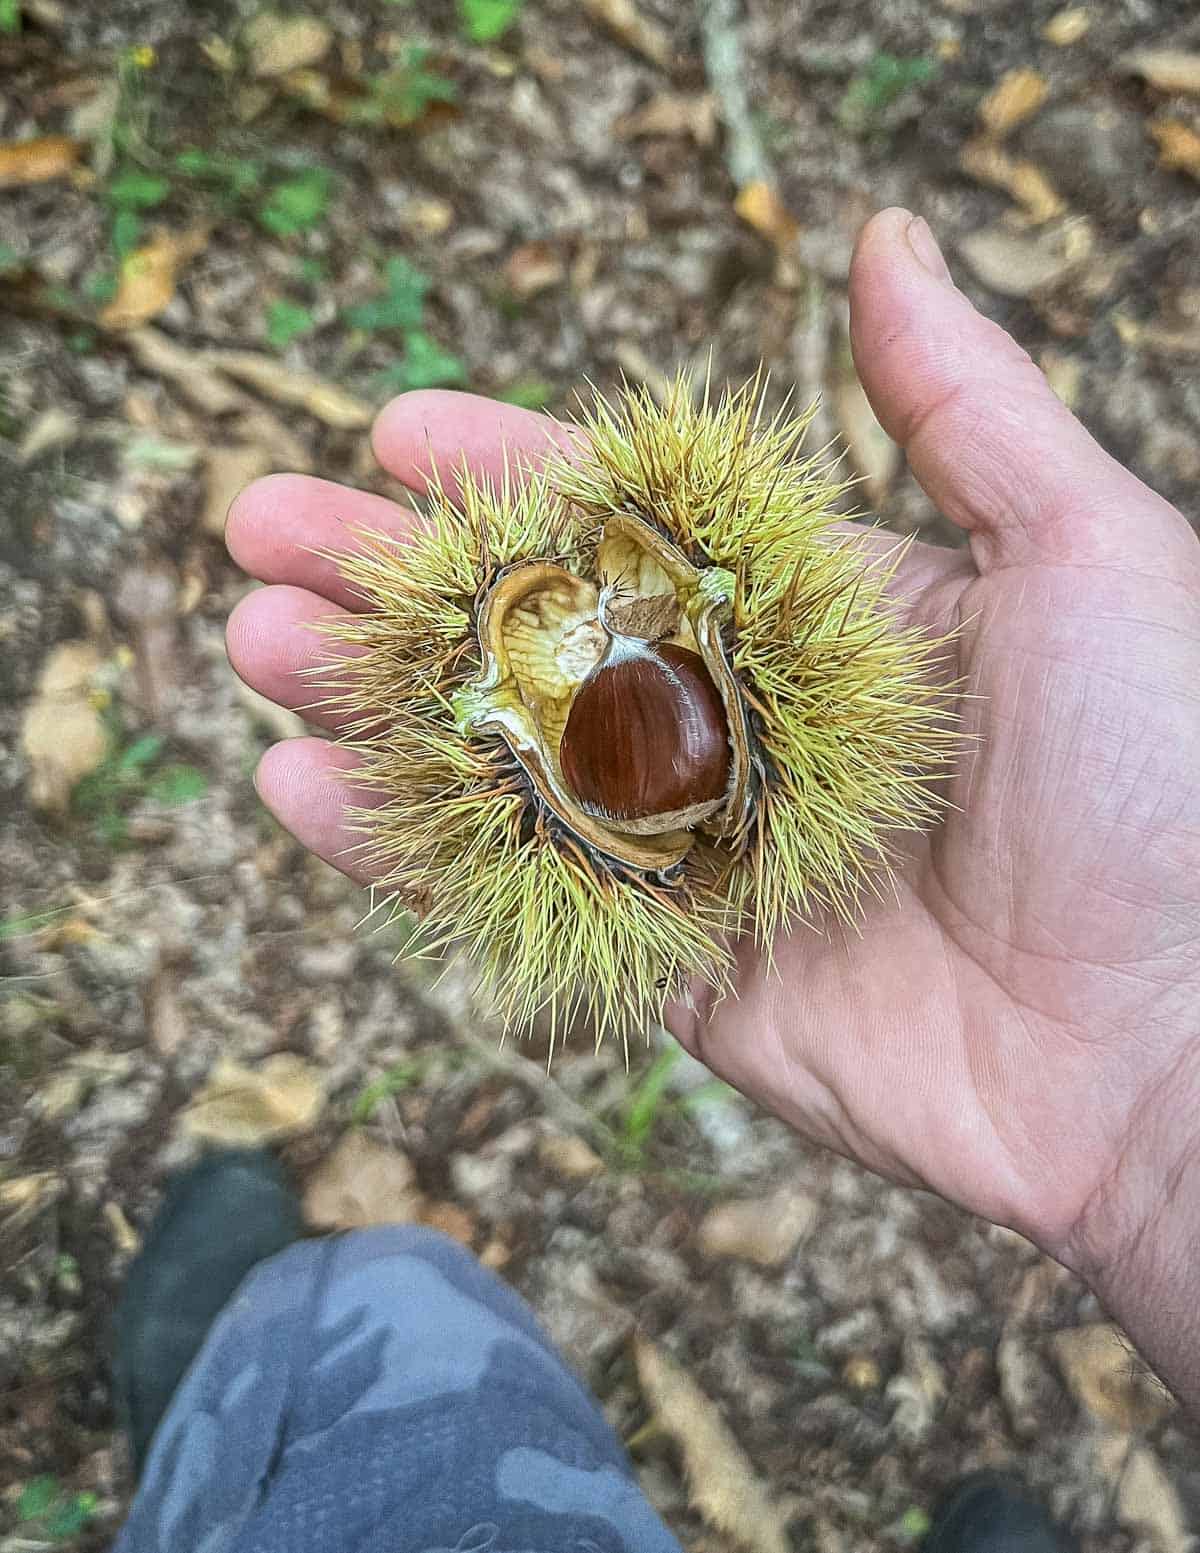 A wild edible Italian chestnut inside of it's spiky hull fresh from the tree in Italy. 